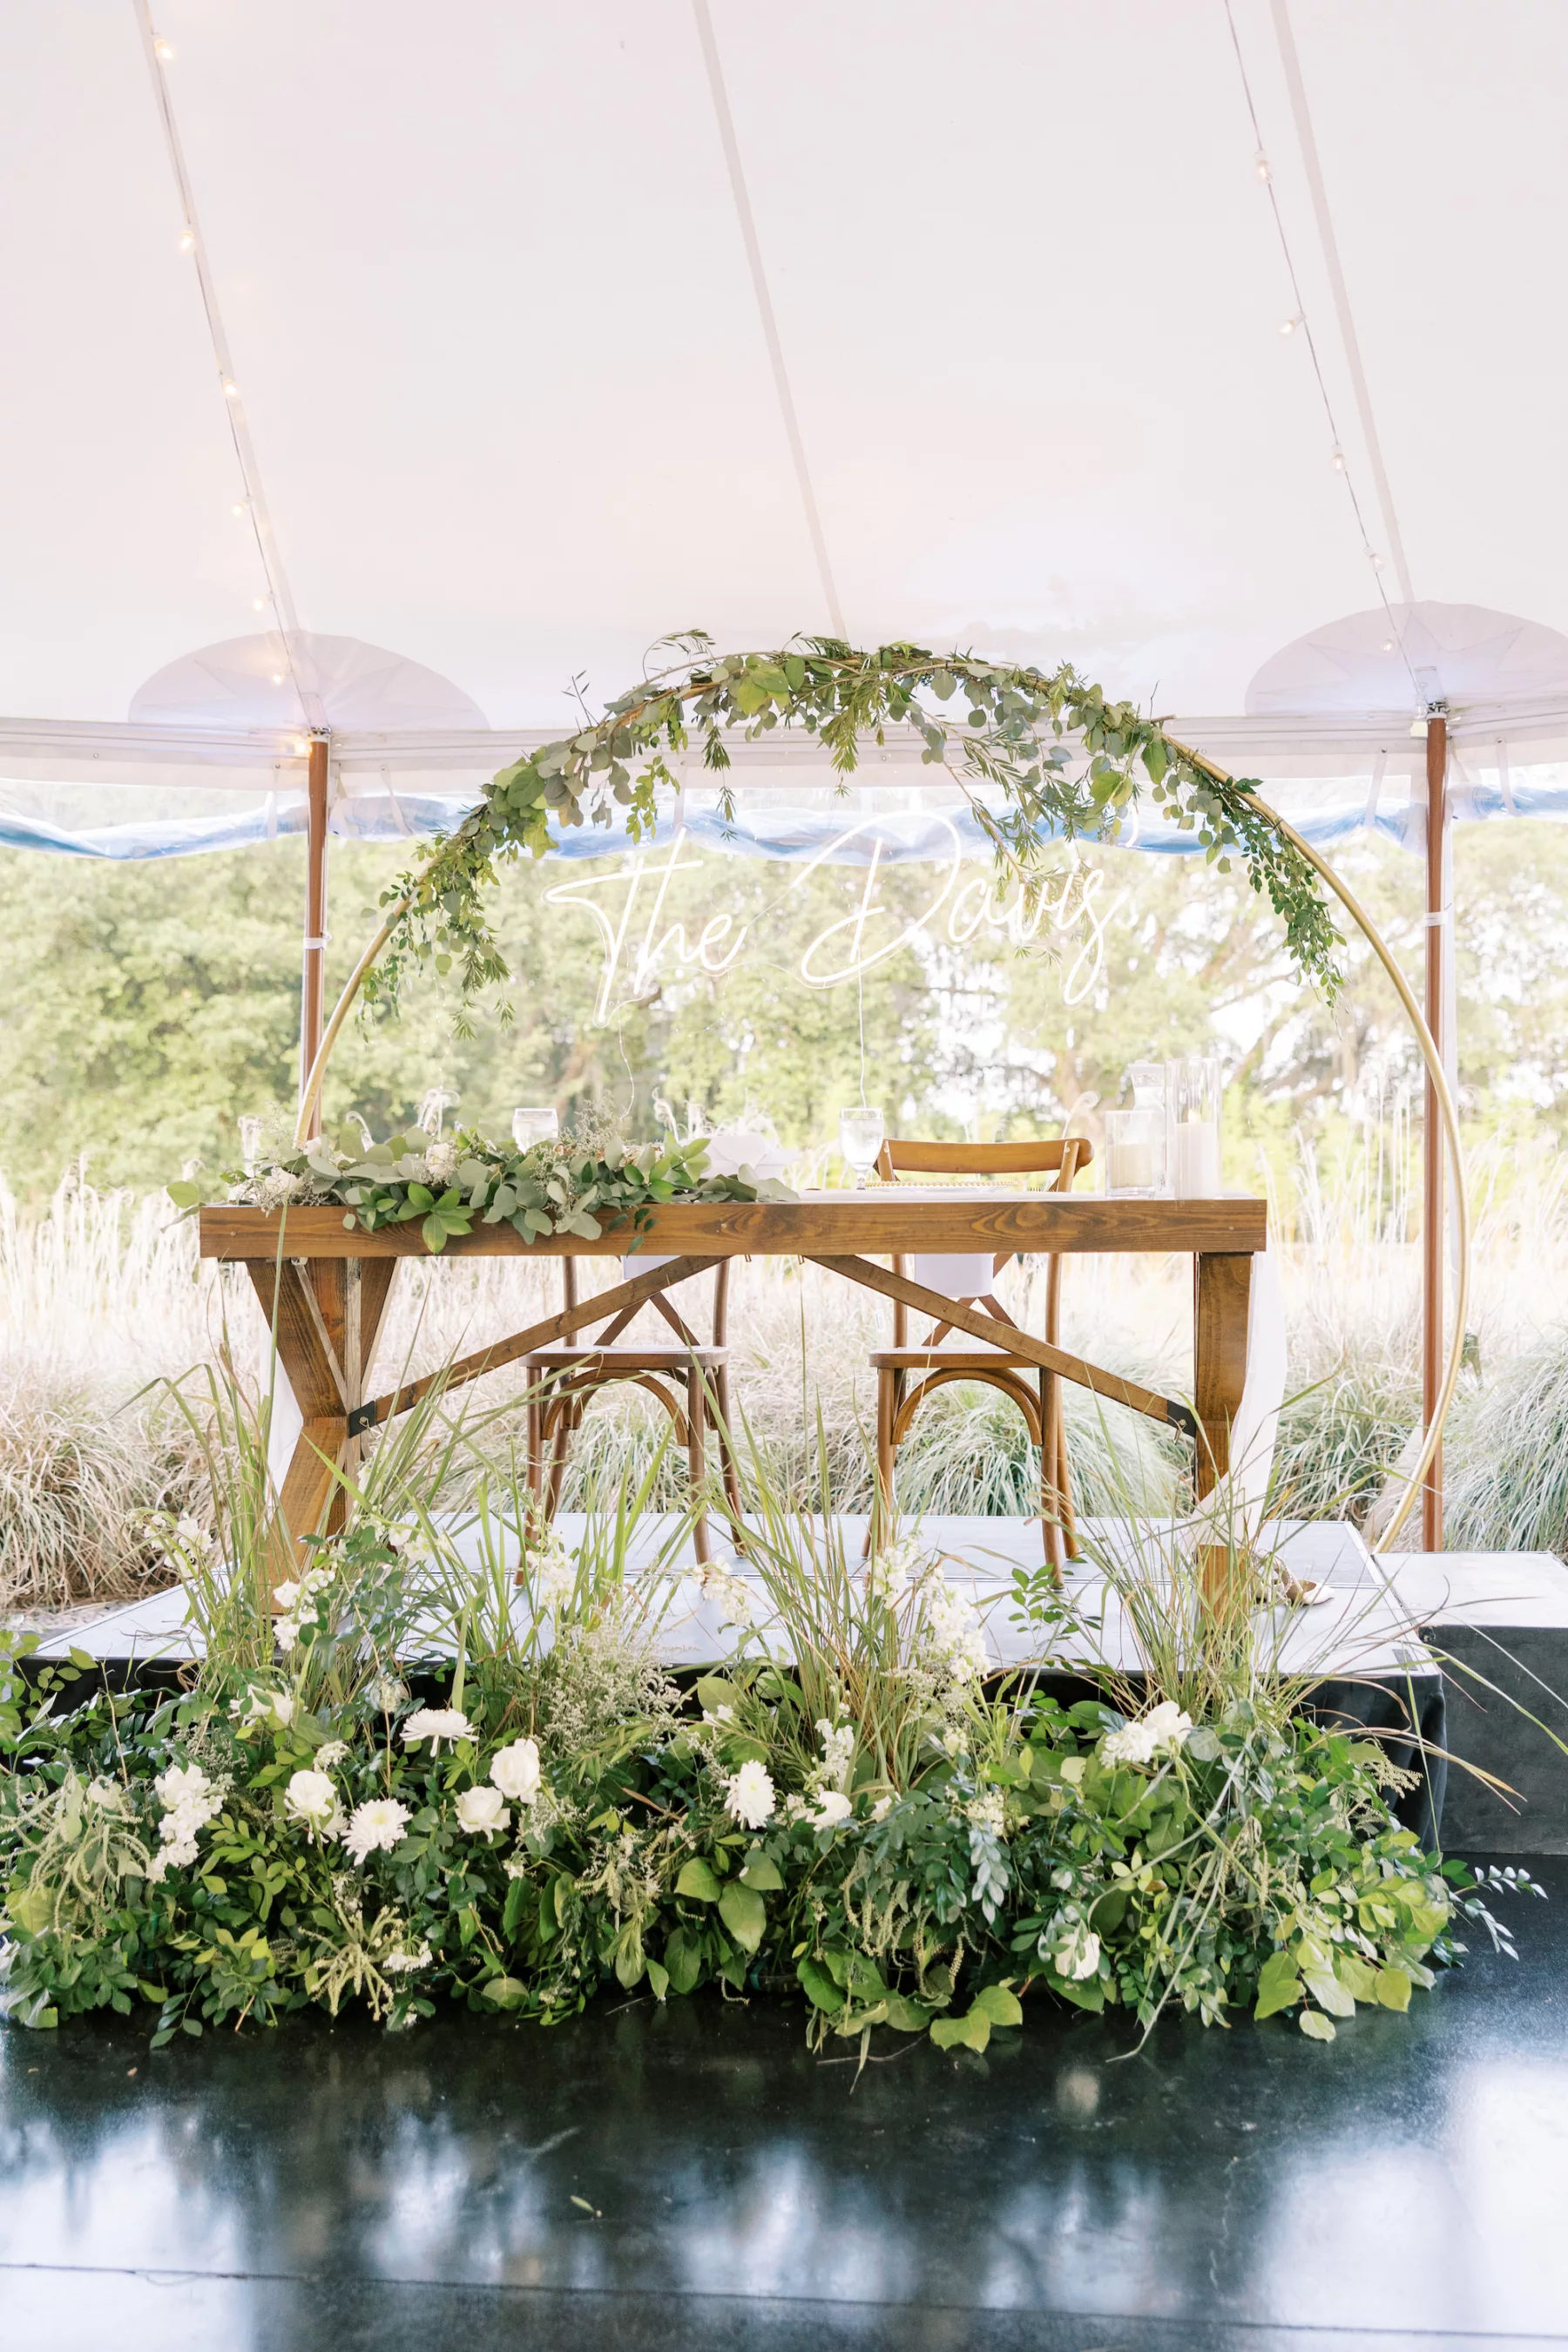 Whimsical Garden Wedding Reception Sweetheart Table Decor Inspiration | Gold Hoop Backdrop with Neon Sign | White Snapdragons and Greenery Floor Arrangement Ideas